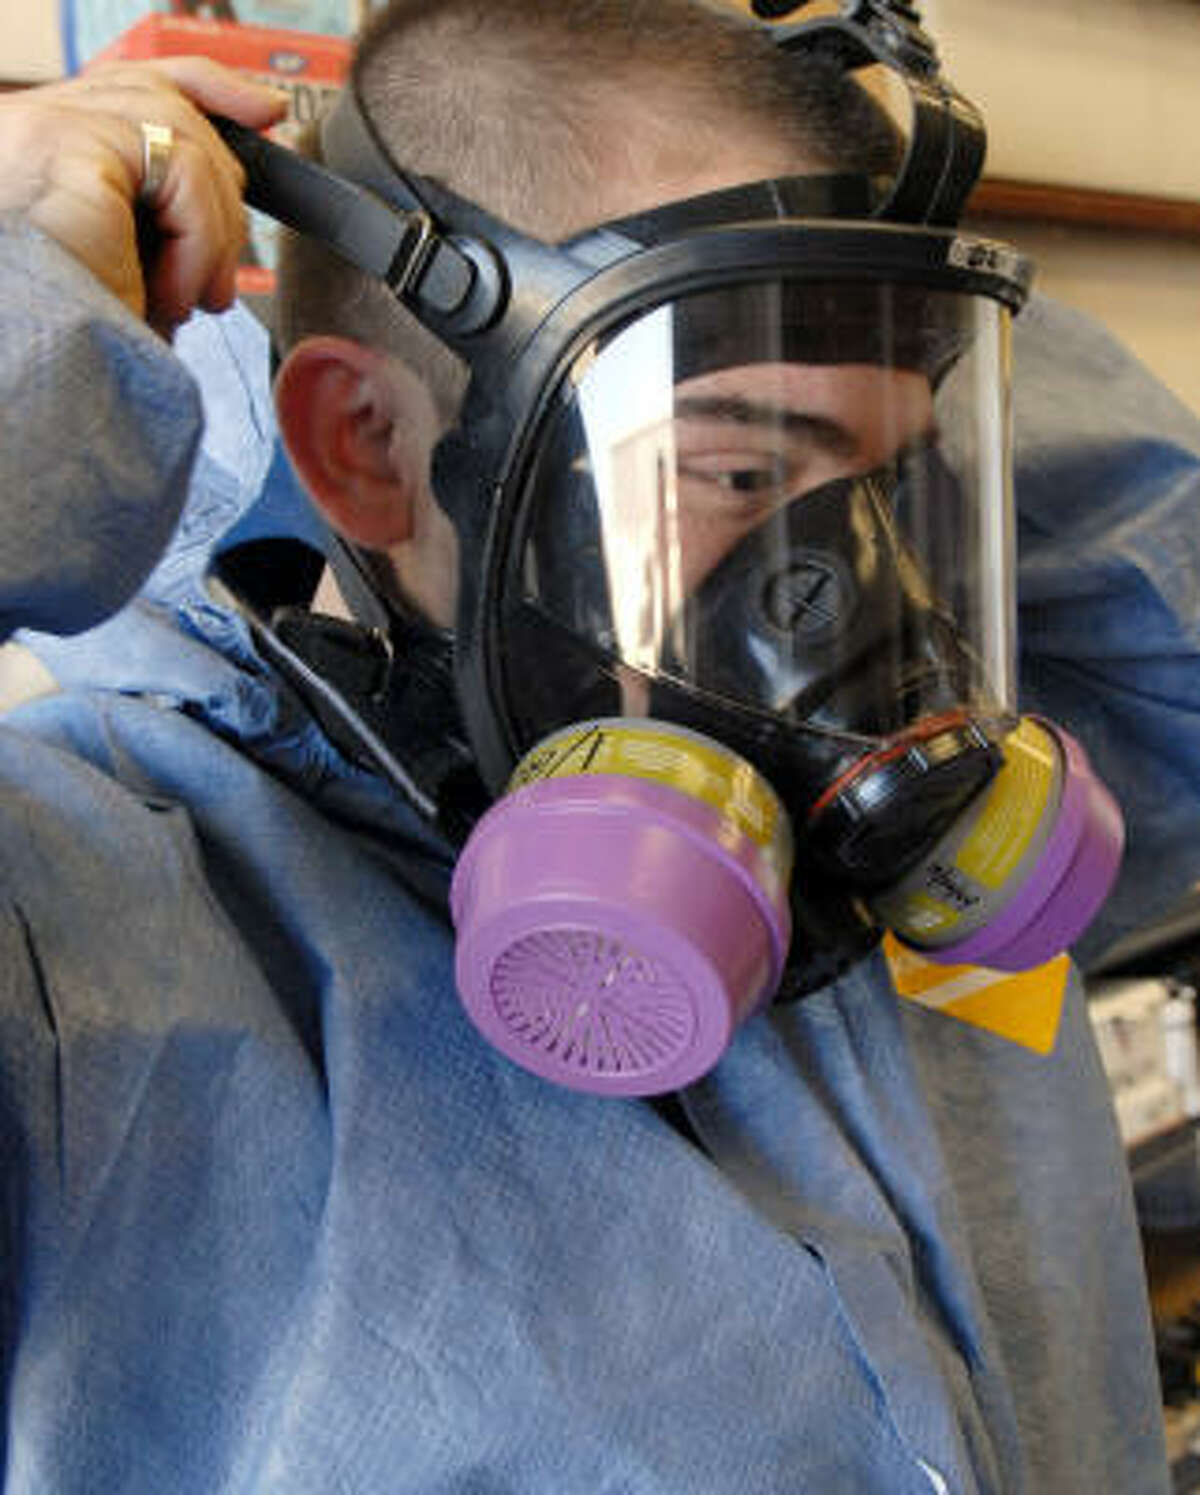 Justin DiGulio dresses in the protective clothing that is worn when cleaning up crime scenes, suicides, houses, and commercial property.